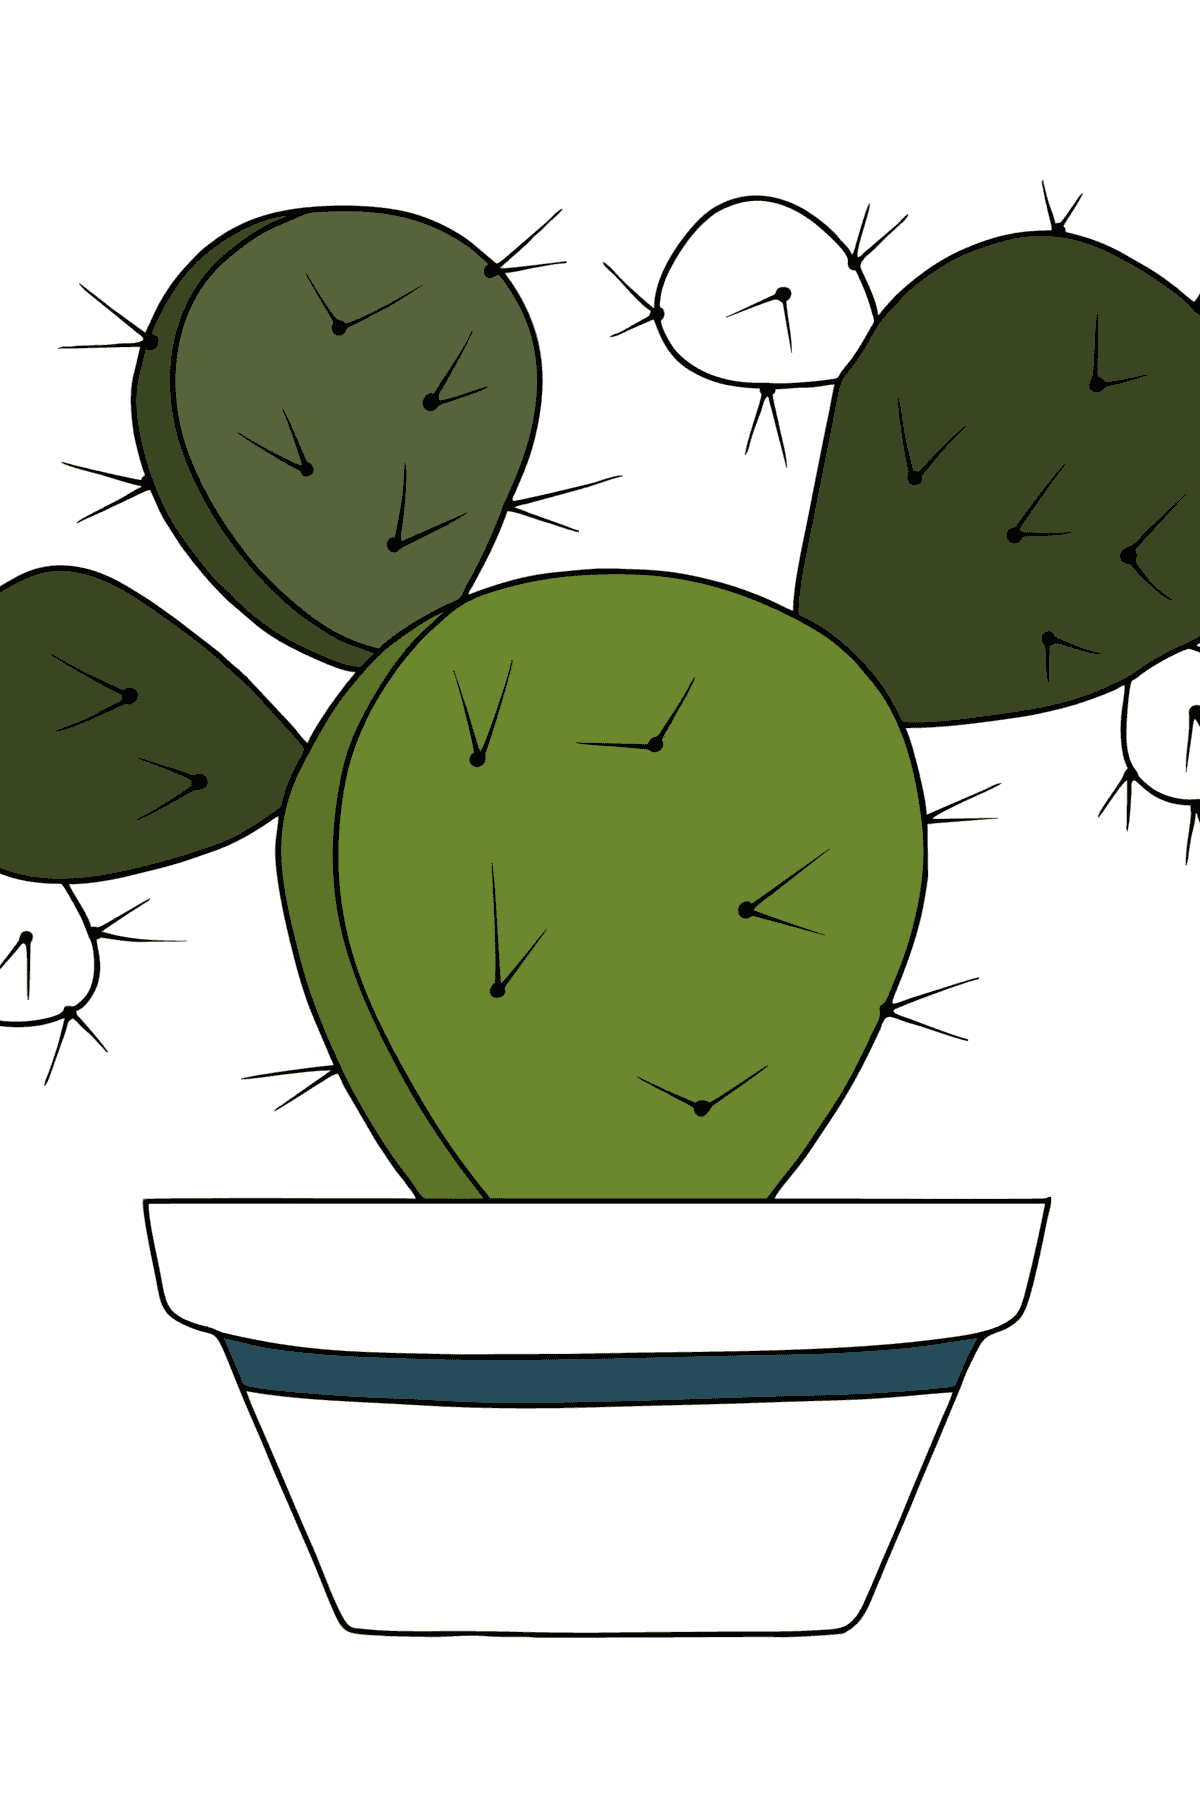 Prickly pear Cactus coloring page - Coloring Pages for Kids